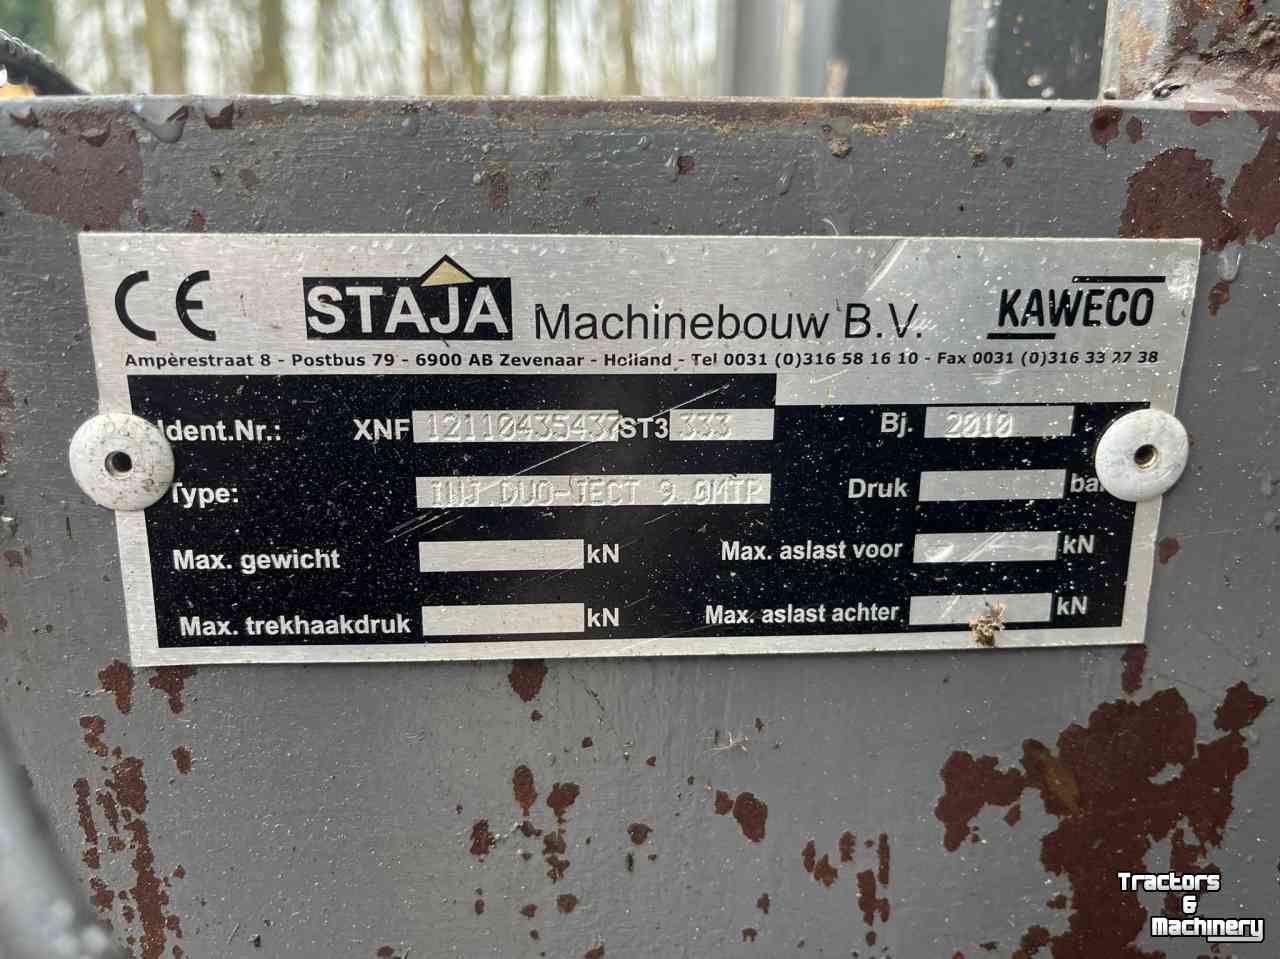 Grassland injector Kaweco Duo-ject 9 meter zodebemester